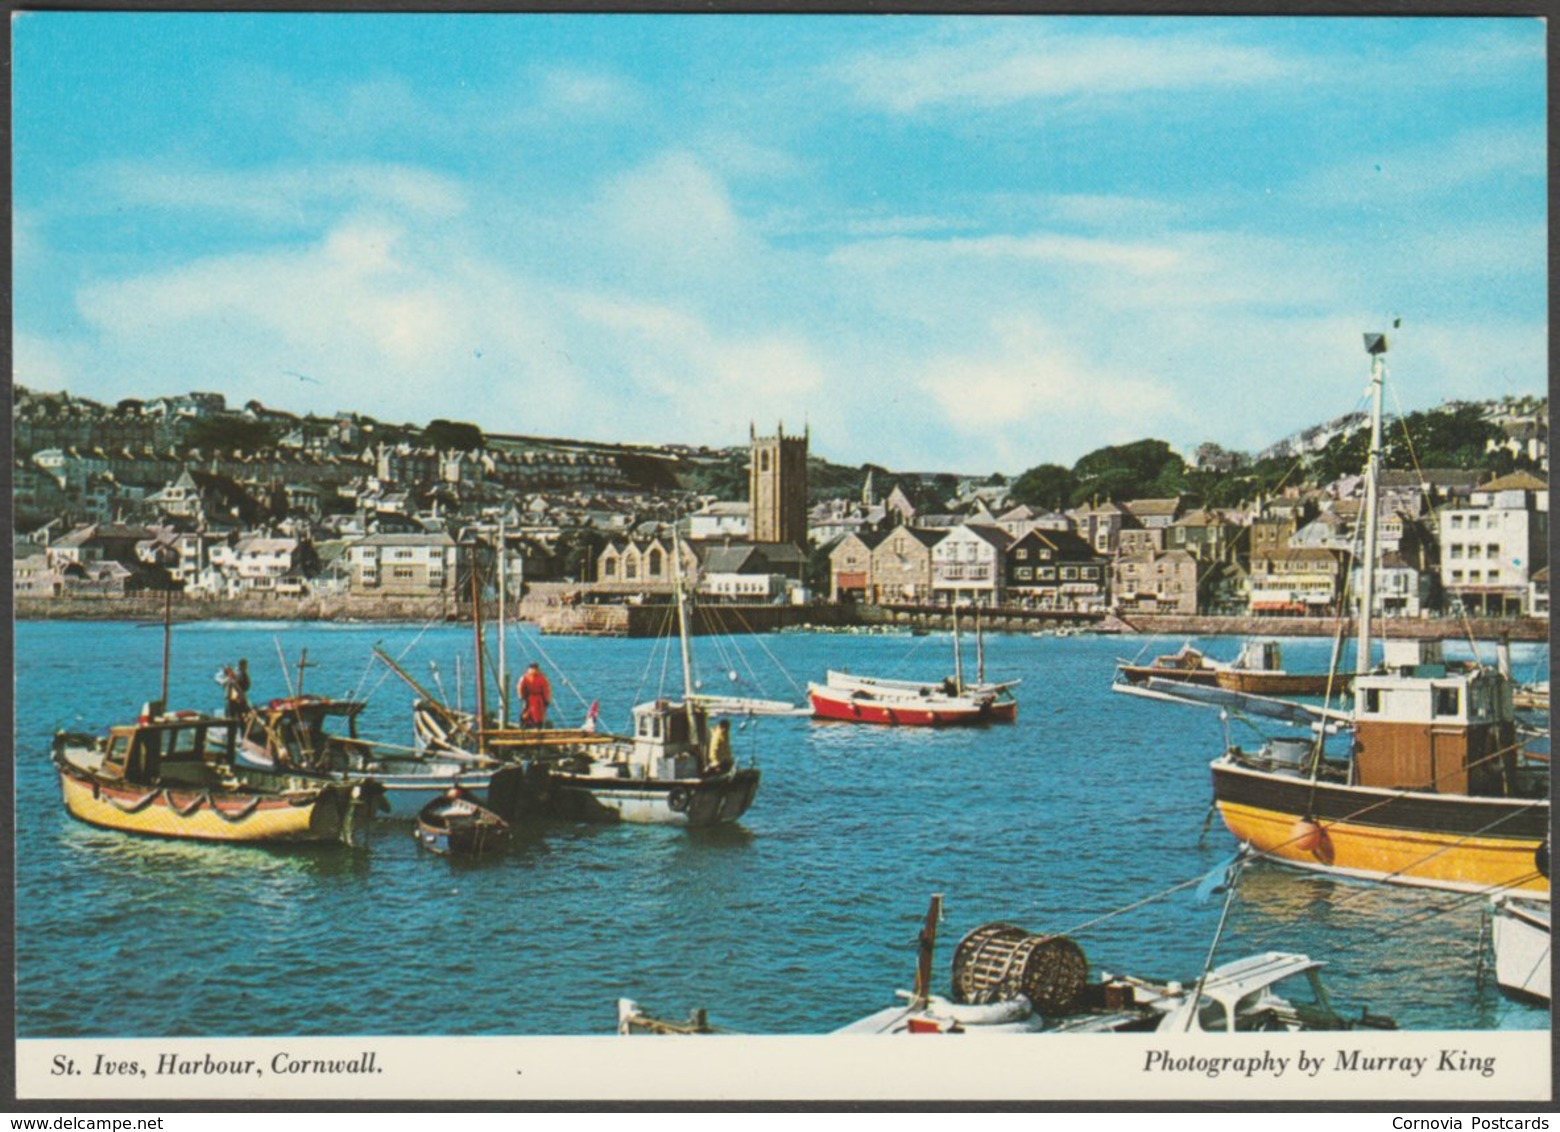 St Ives Harbour, Cornwall, C.1980s - Murray King Postcard - St.Ives